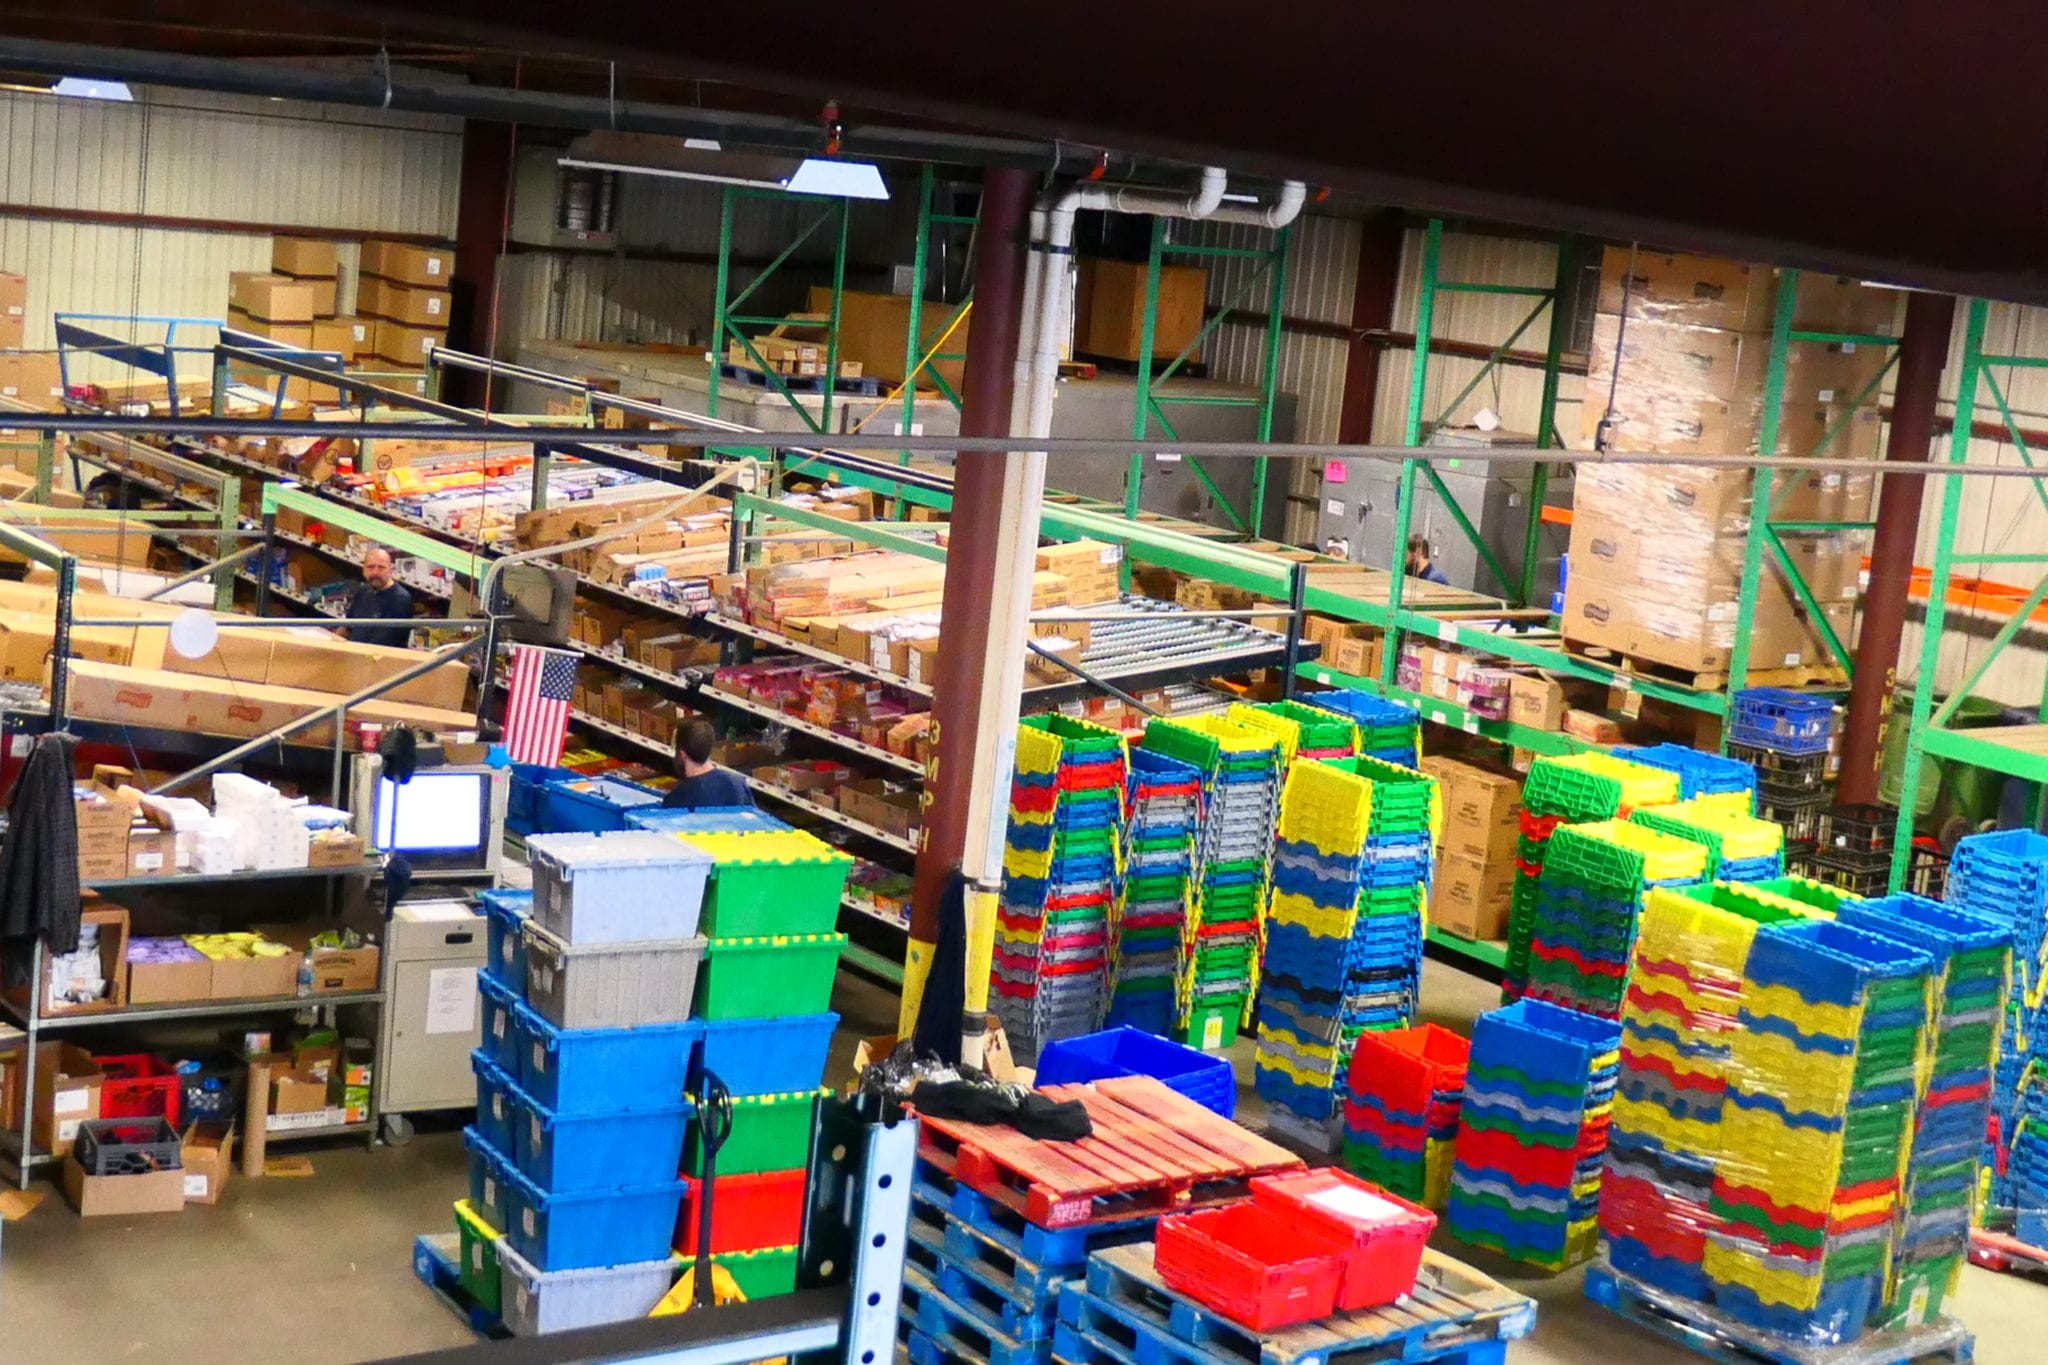 A fully modernized warehouse to supply our accounts with snacks and refreshments